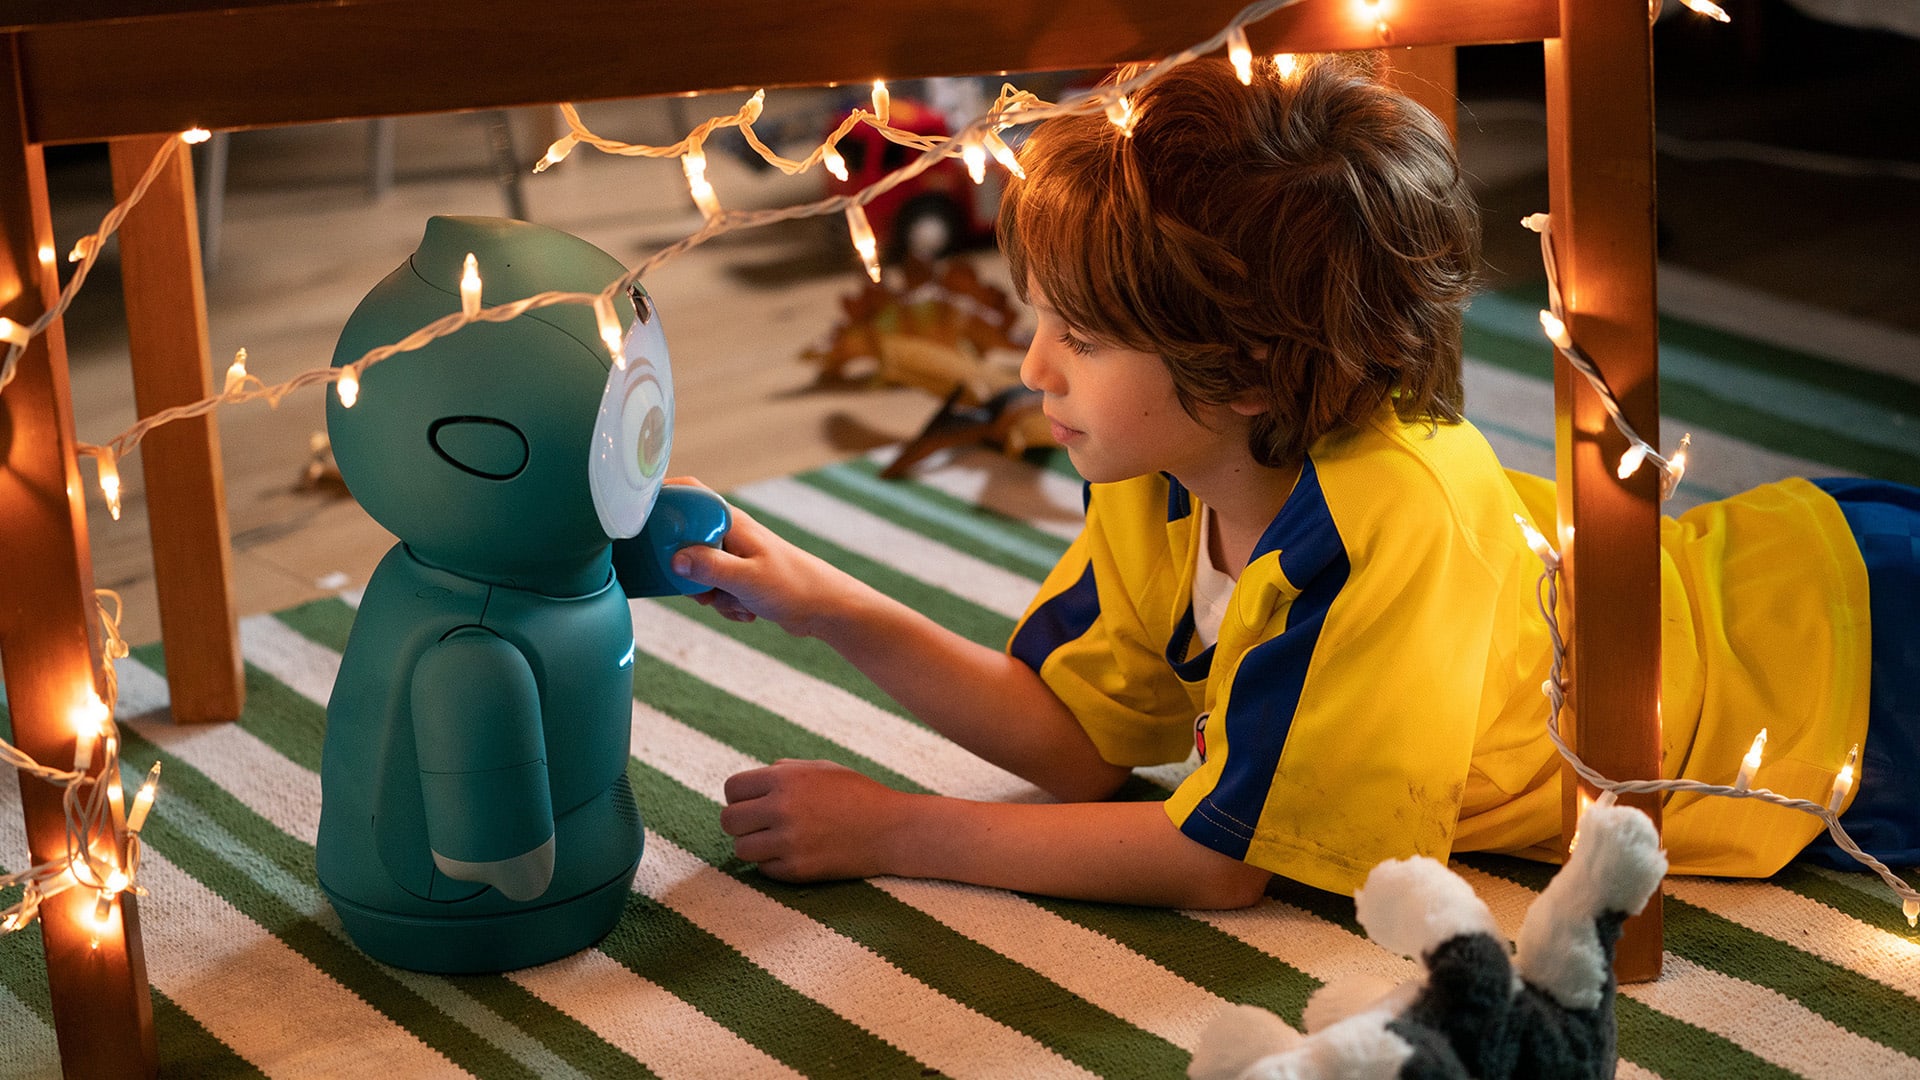 Moxie is a Pixar-inspired robot backed by Toyota, Sony, Amazon, and Intel